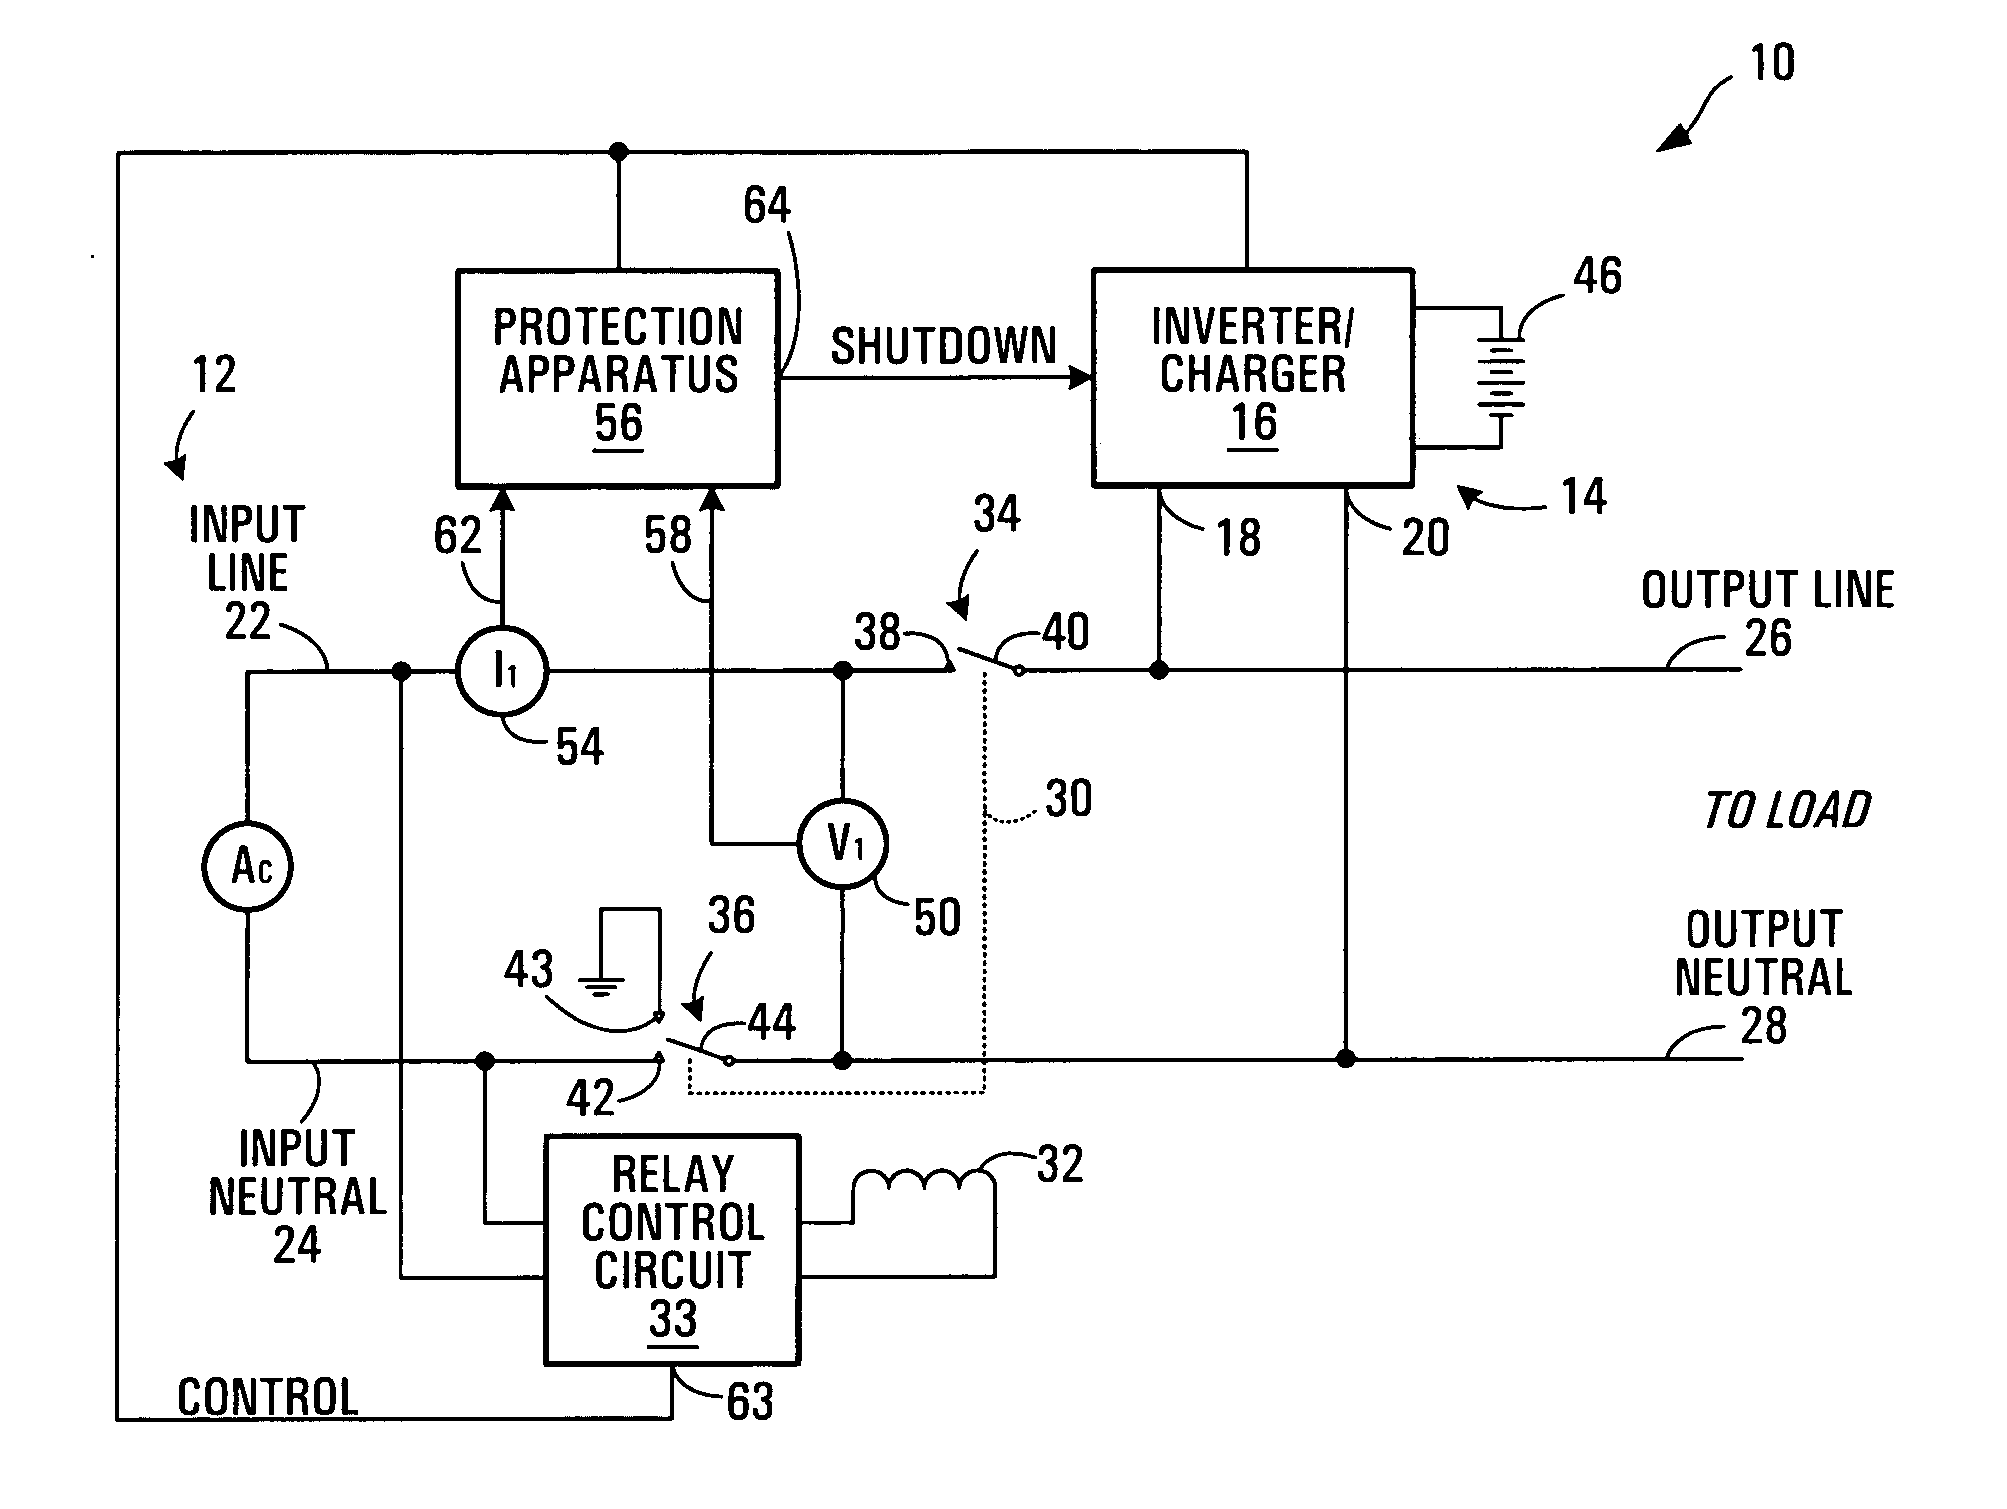 AC power backfeed protection based on voltage